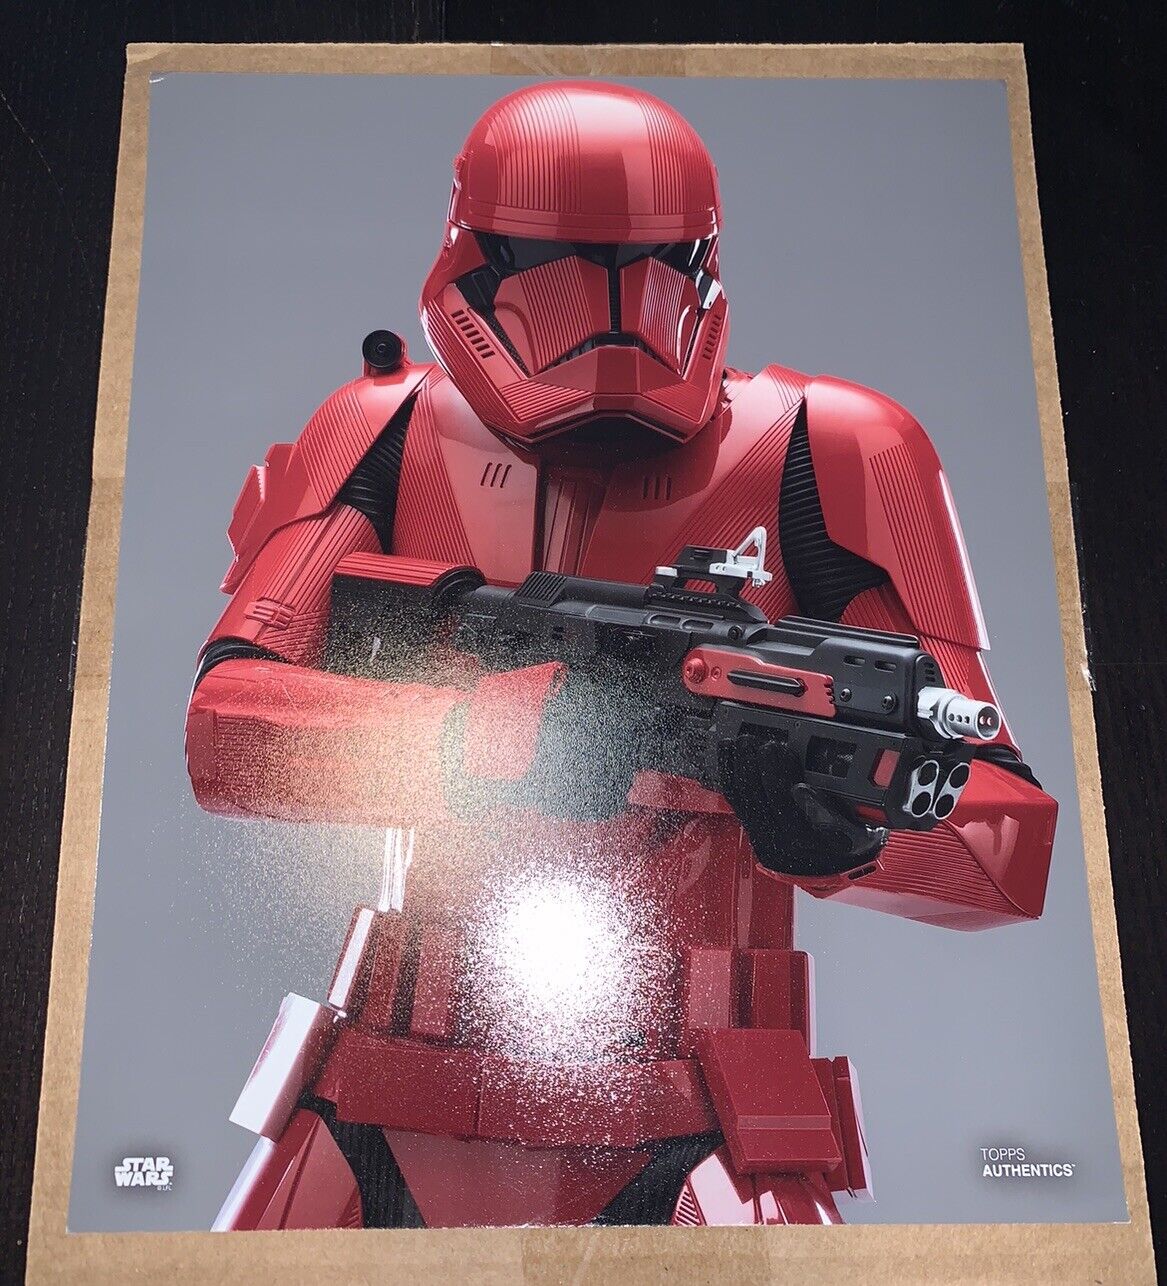 STAR WARS 2019 SDCC EXCLUSIVE TOPPS PROMO 8x10 TOPPS Authentic SDCC SITH TROOPER